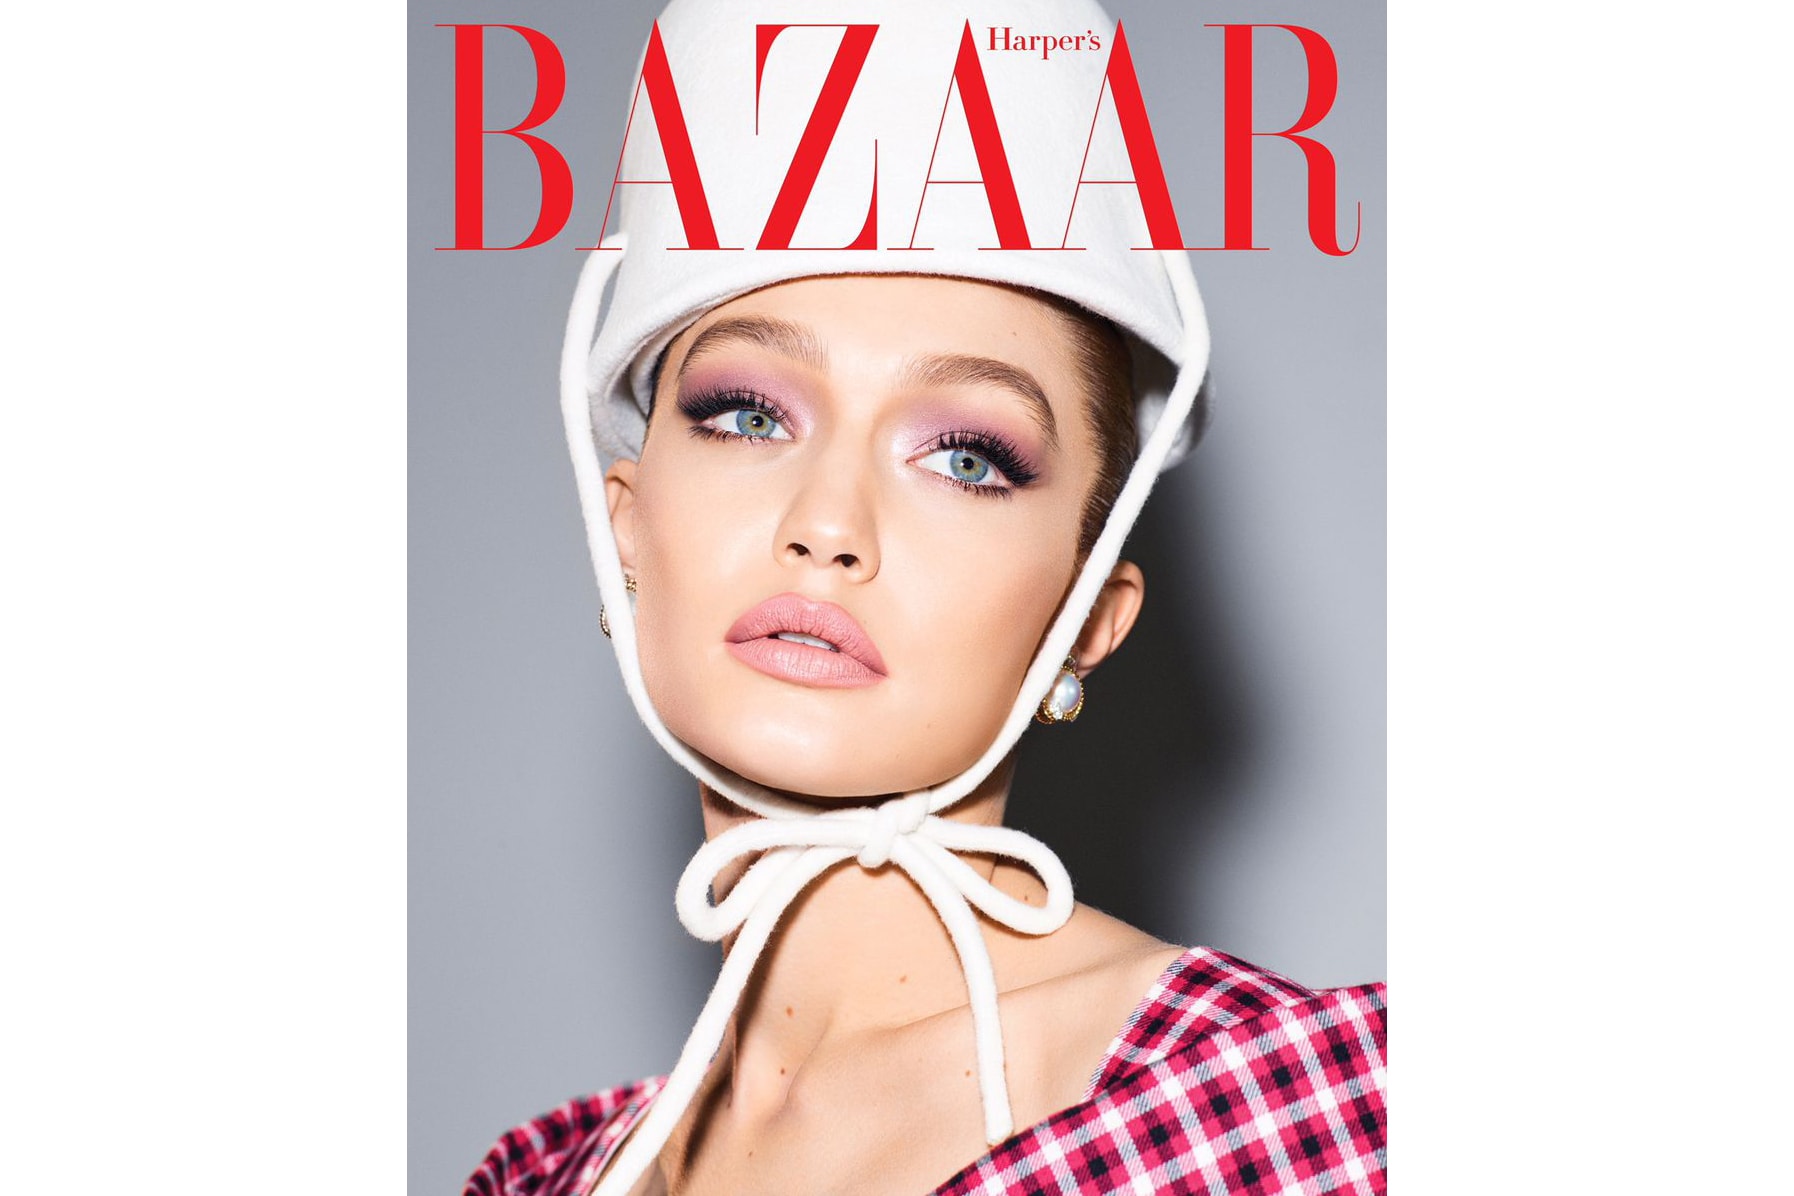 Gigi Hadid Harper's Bazaar May 2018 Issue Cover Editorial Magazine Interview Blake Lively